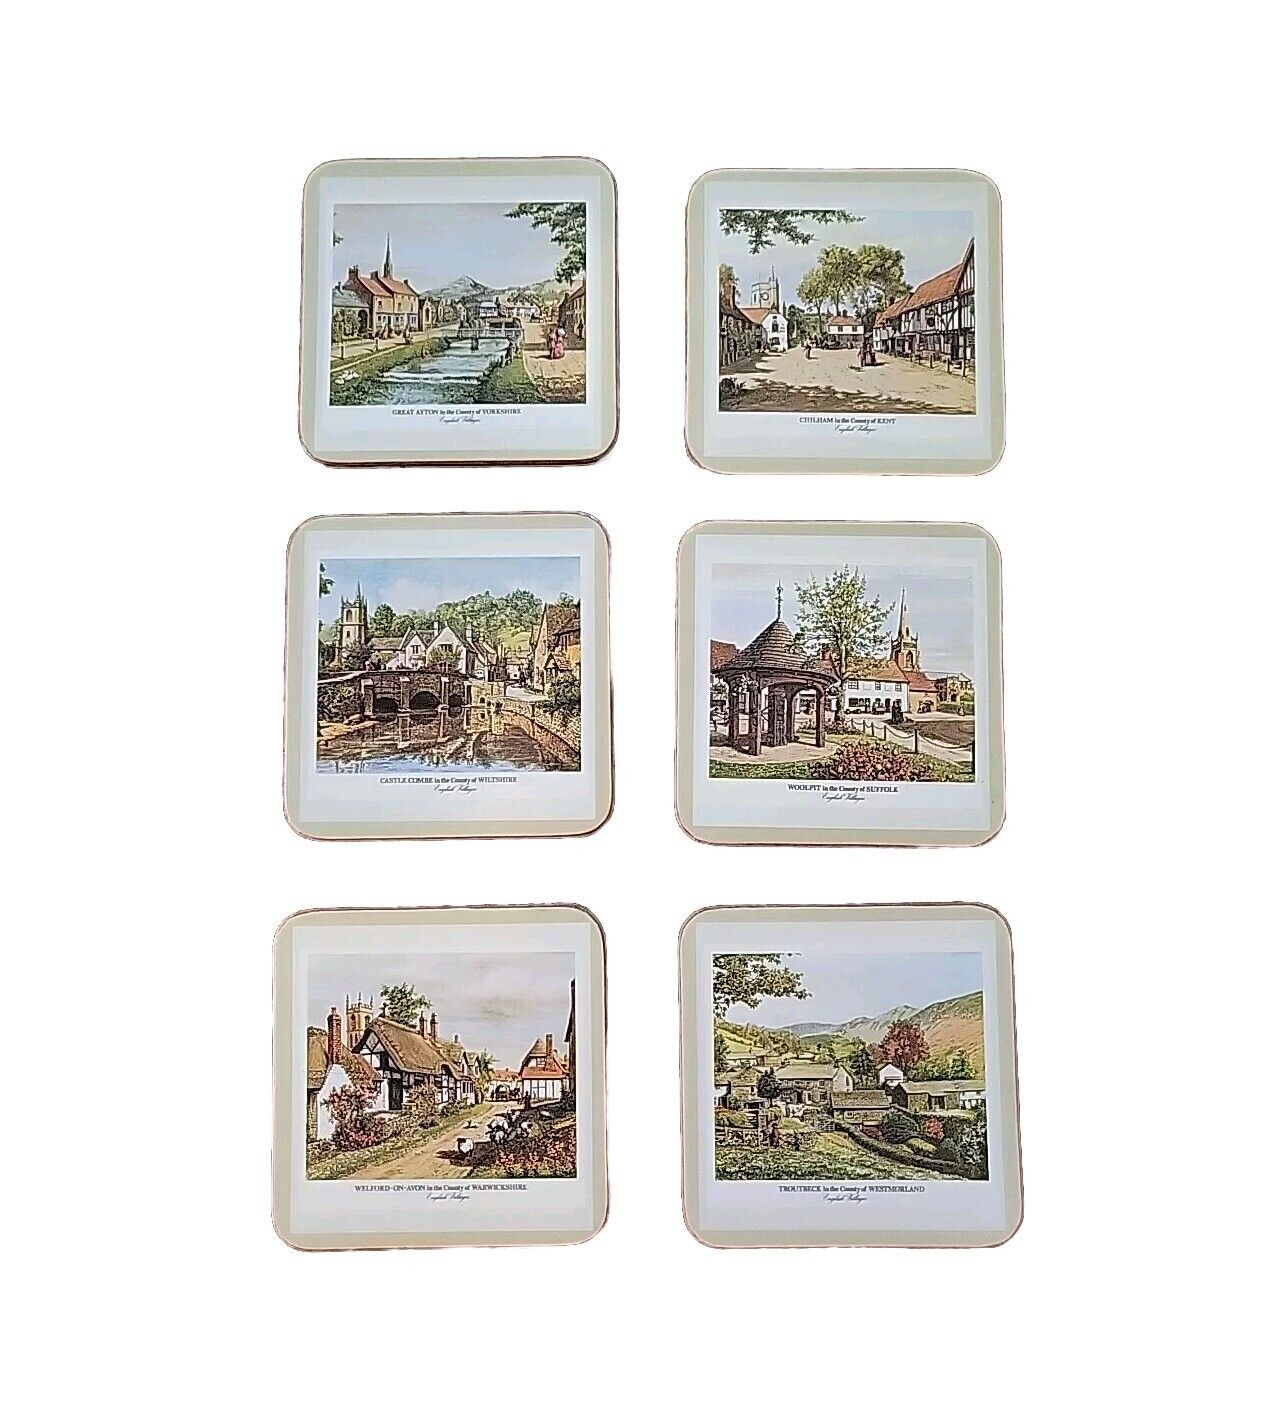 PIMPERNEL ACRYLIC ENGLISH VILLAGES SIX TRADITIONAL DRINK COASTERS IN BOX